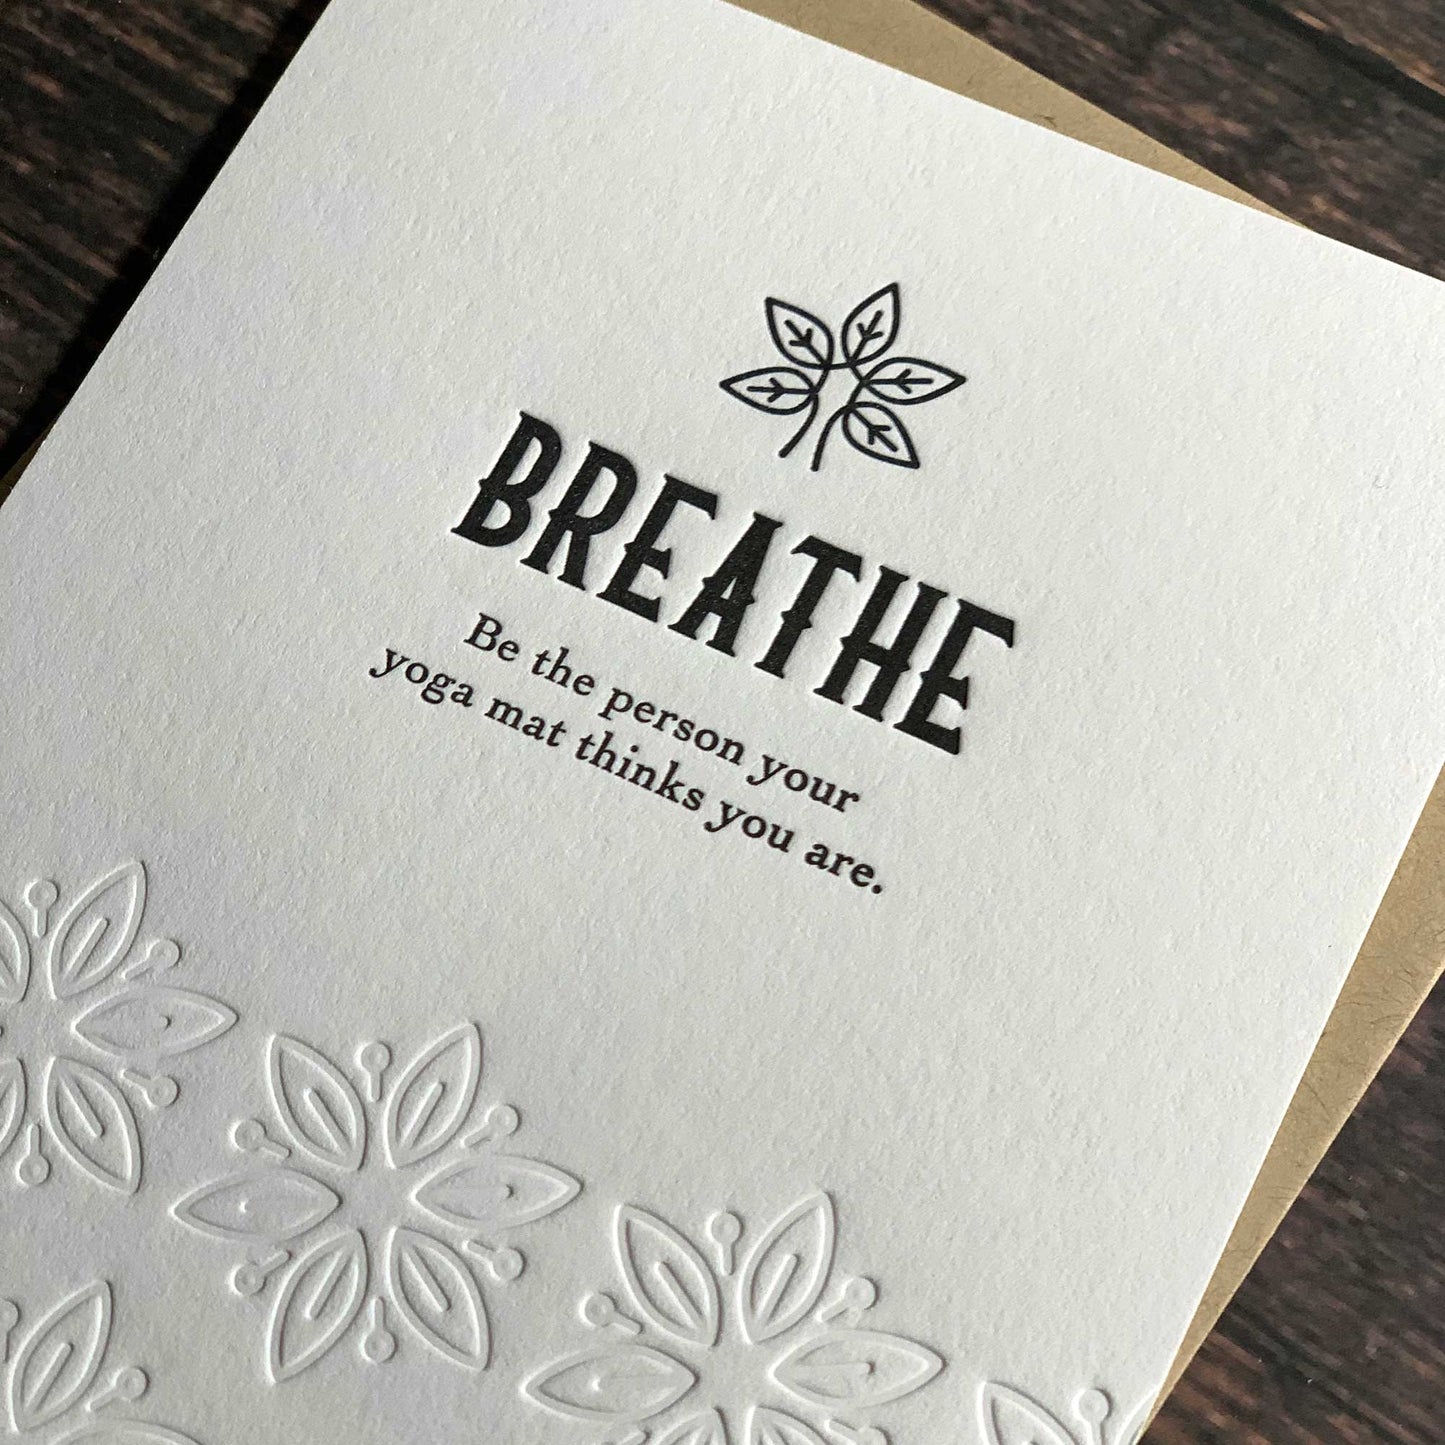 Breathe, Be the person your yoga mat thinks you are. Encouragement Card, Letterpress printed, view shows letterpress impression, includes envelope